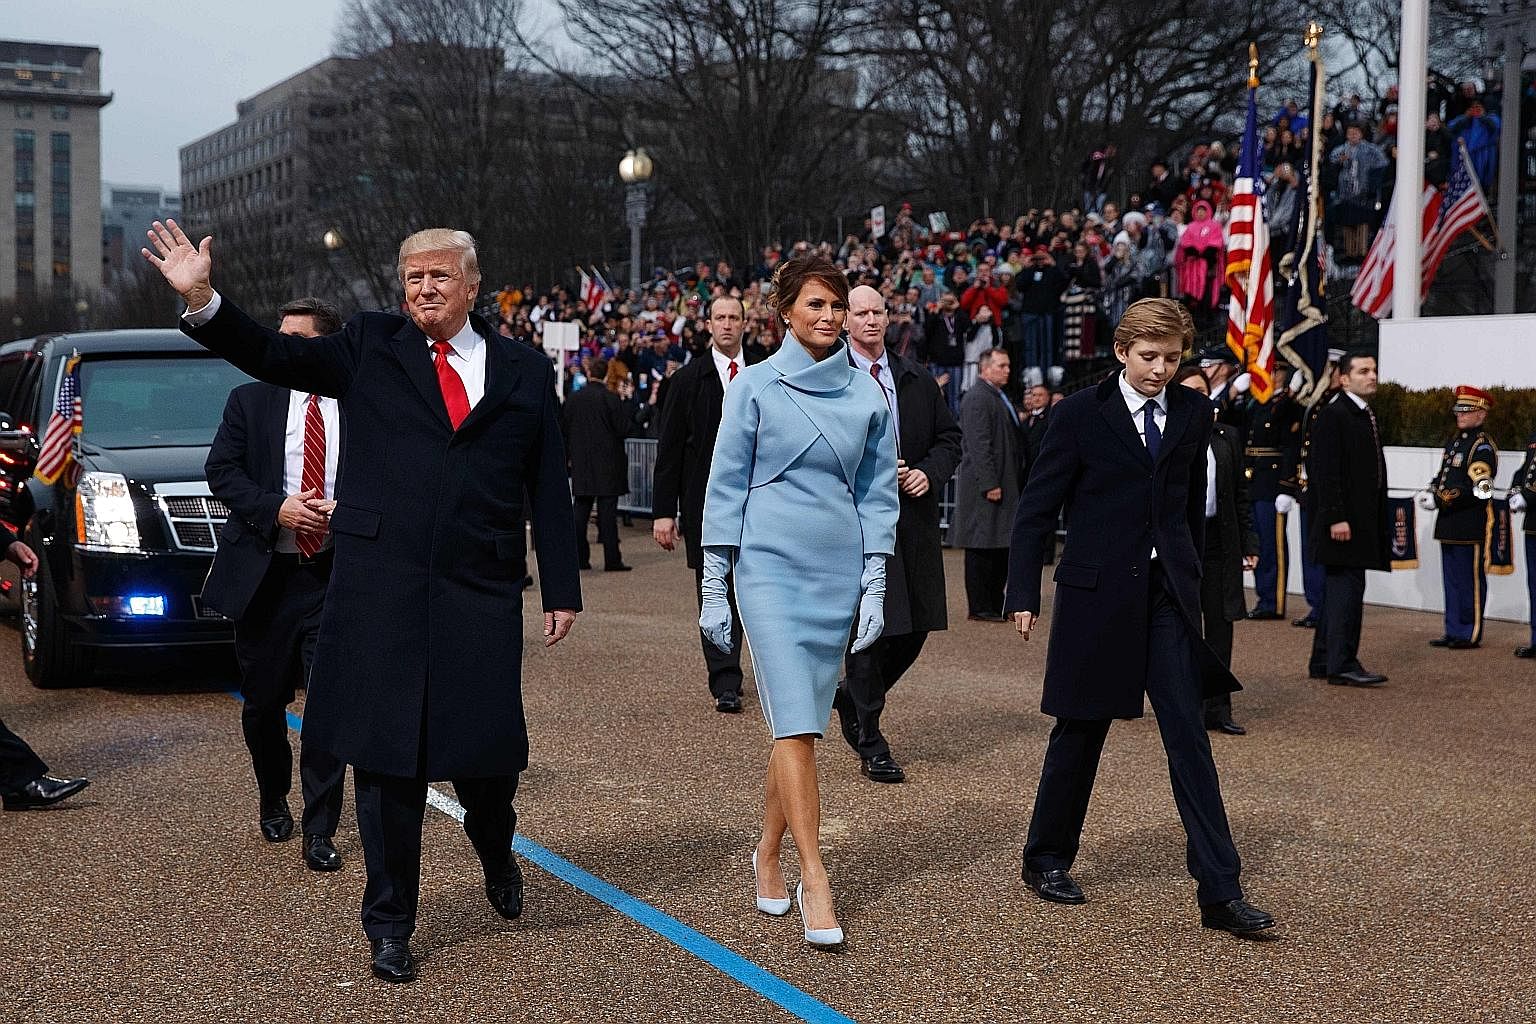 President Trump, his wife Melania and their son Barron during the inauguration parade in Washington last Friday. The writer says no one should underestimate Mr Trump, who published The Art Of The Deal in 1987, but MAGAlomania alone will not be enough